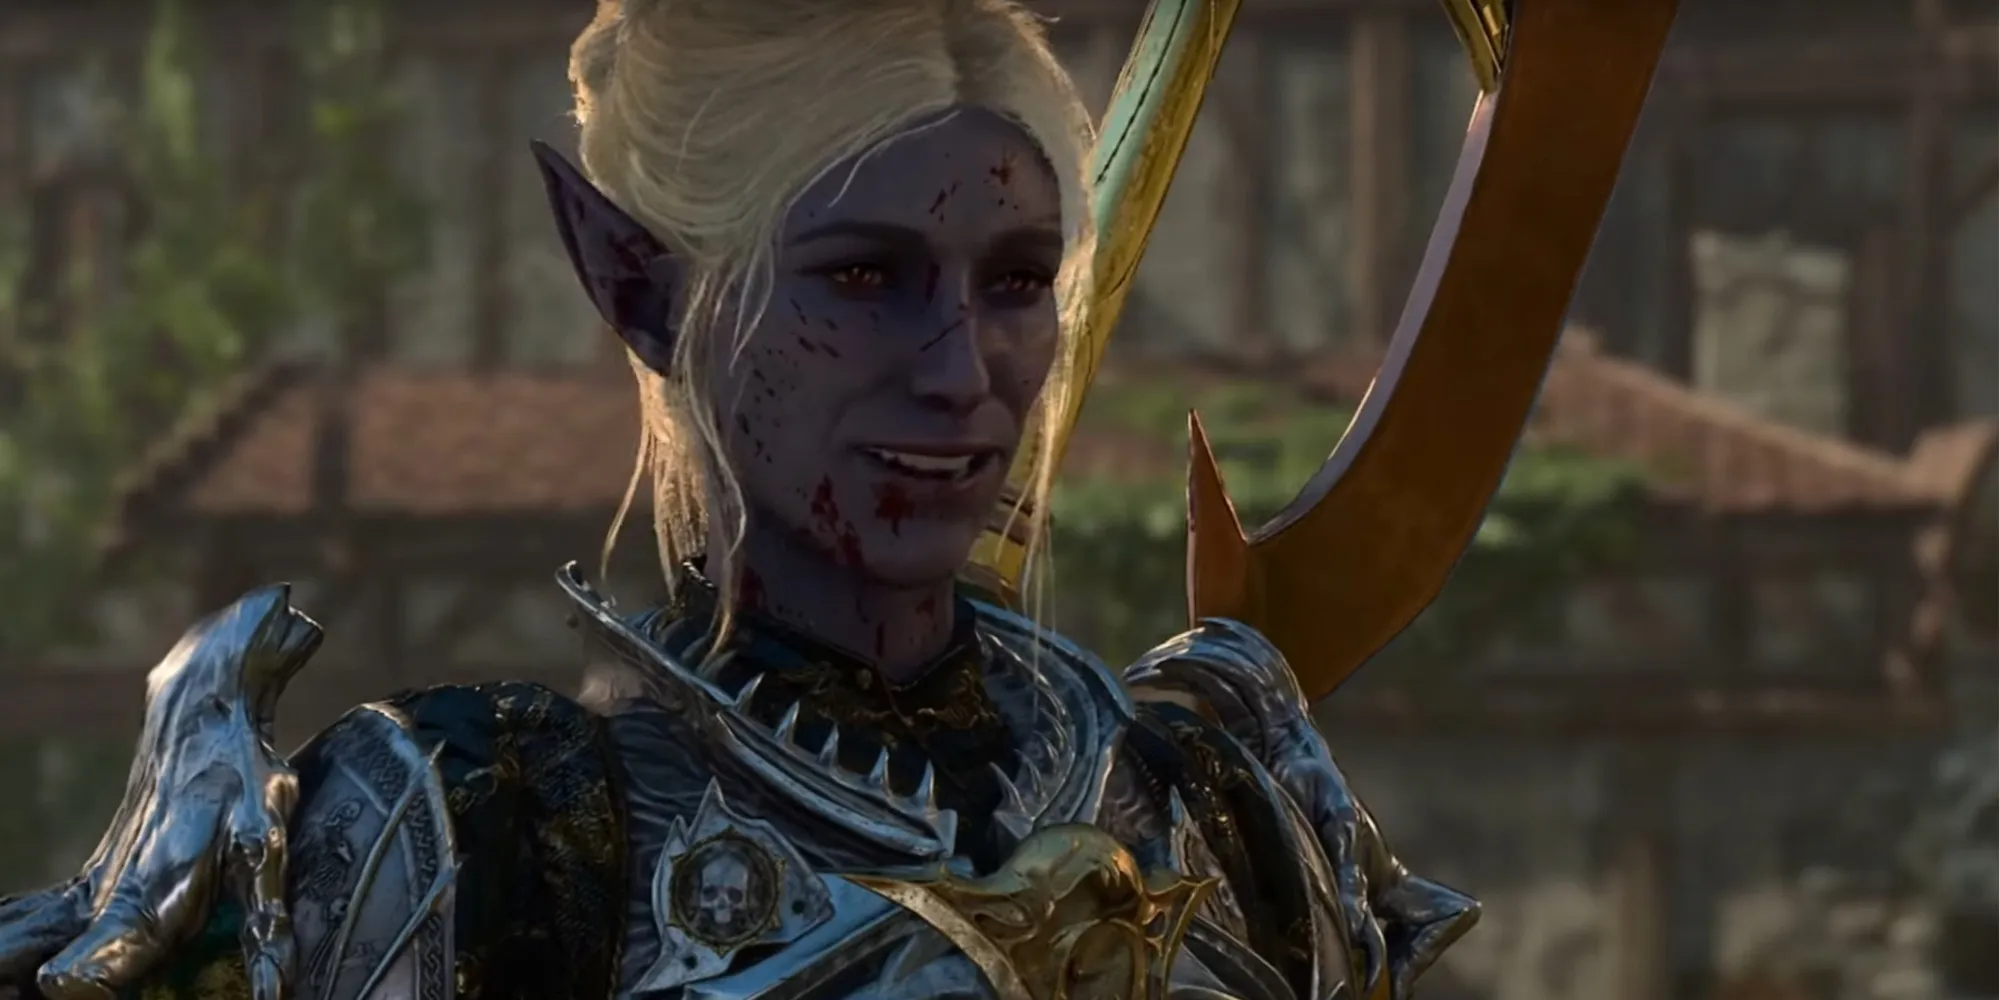 Minthara The Female Dark Elf, Wearing Heavy Armor And A Greataxe, Laughs